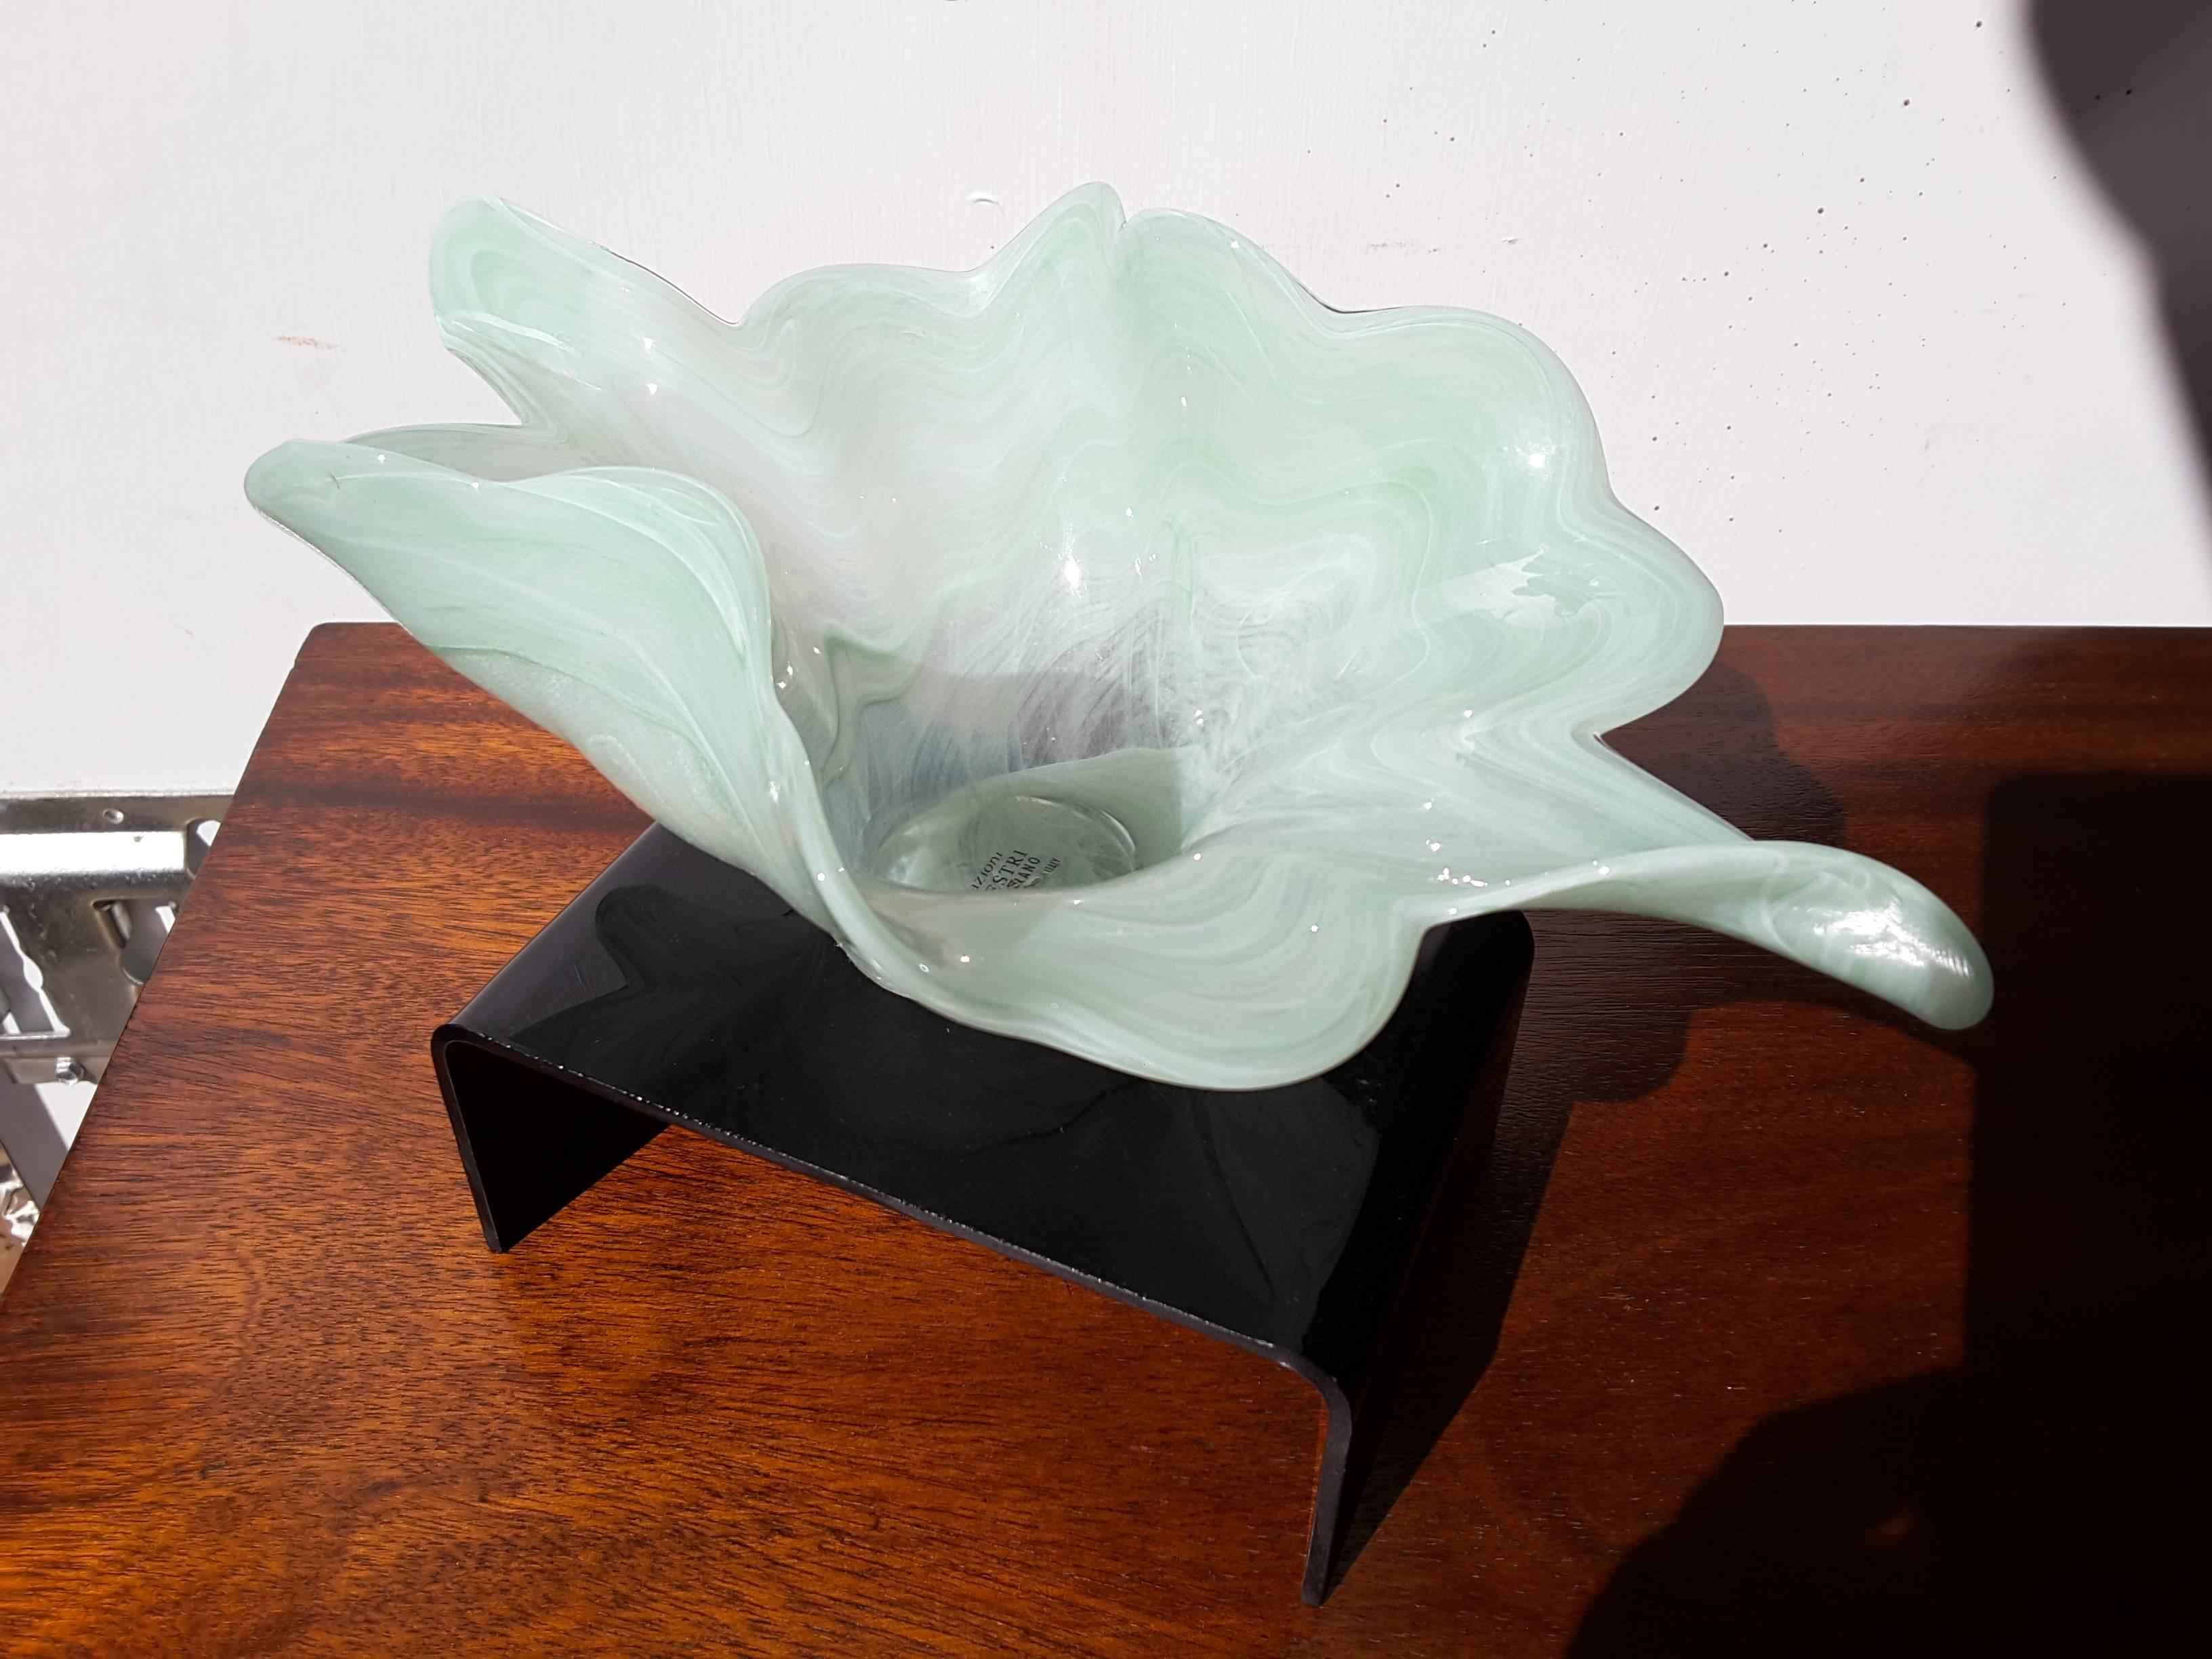 Murano Italian art glass centerpiece free-form bowl, in green and white swirl glass, the bowl still has the original label on the inside on the base as seen in the picture. The centerpiece measures 10